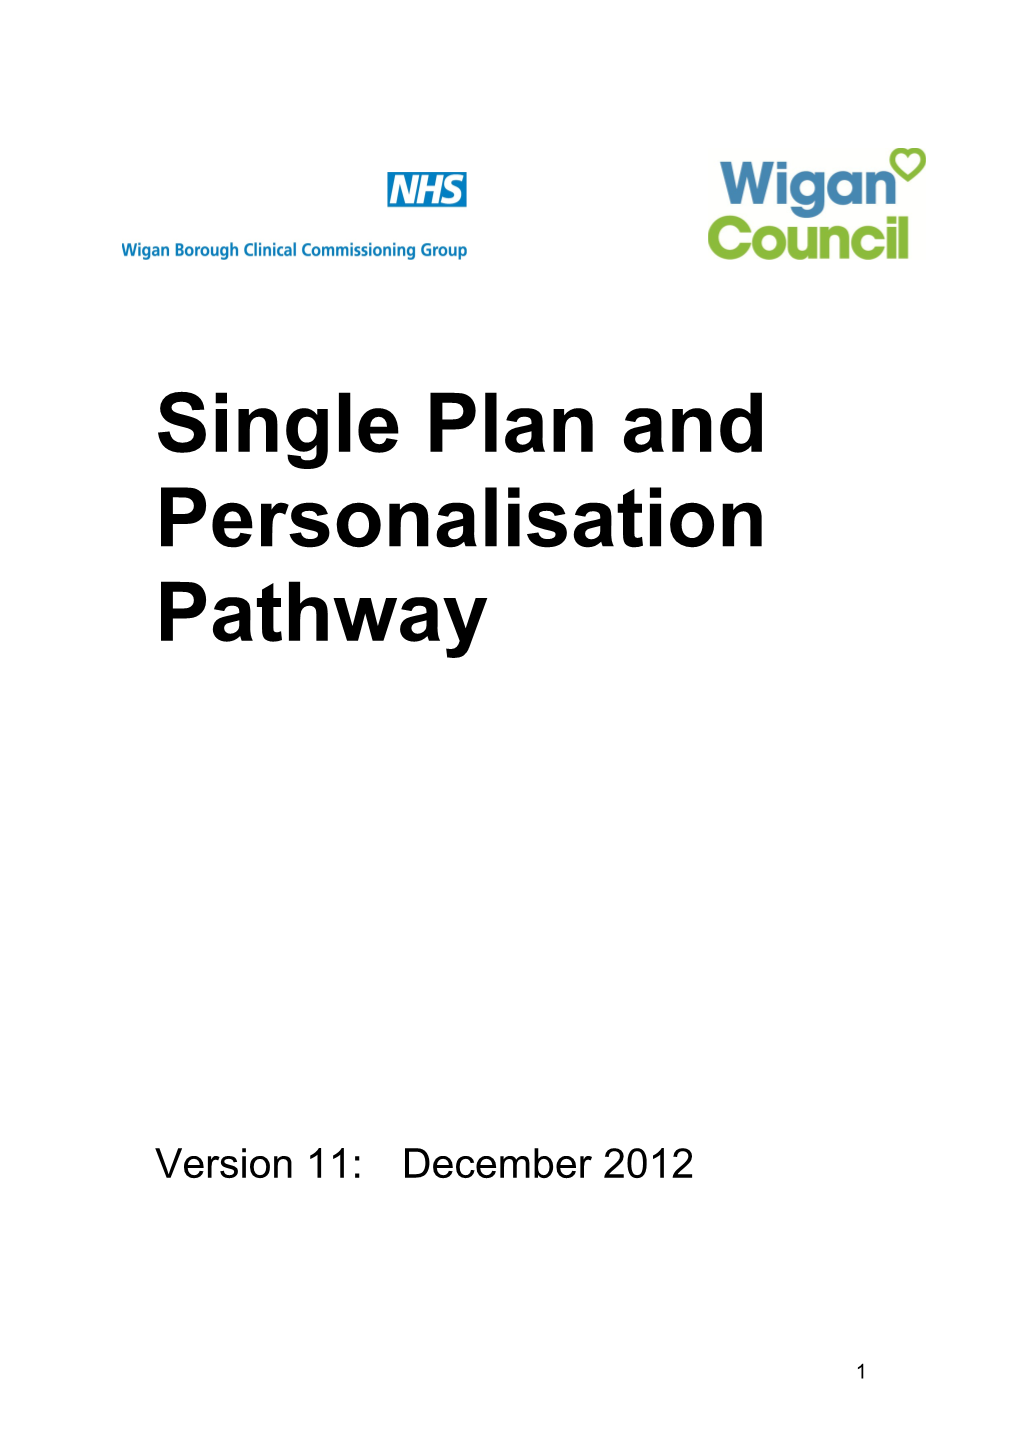 Single Plan and Personalisation